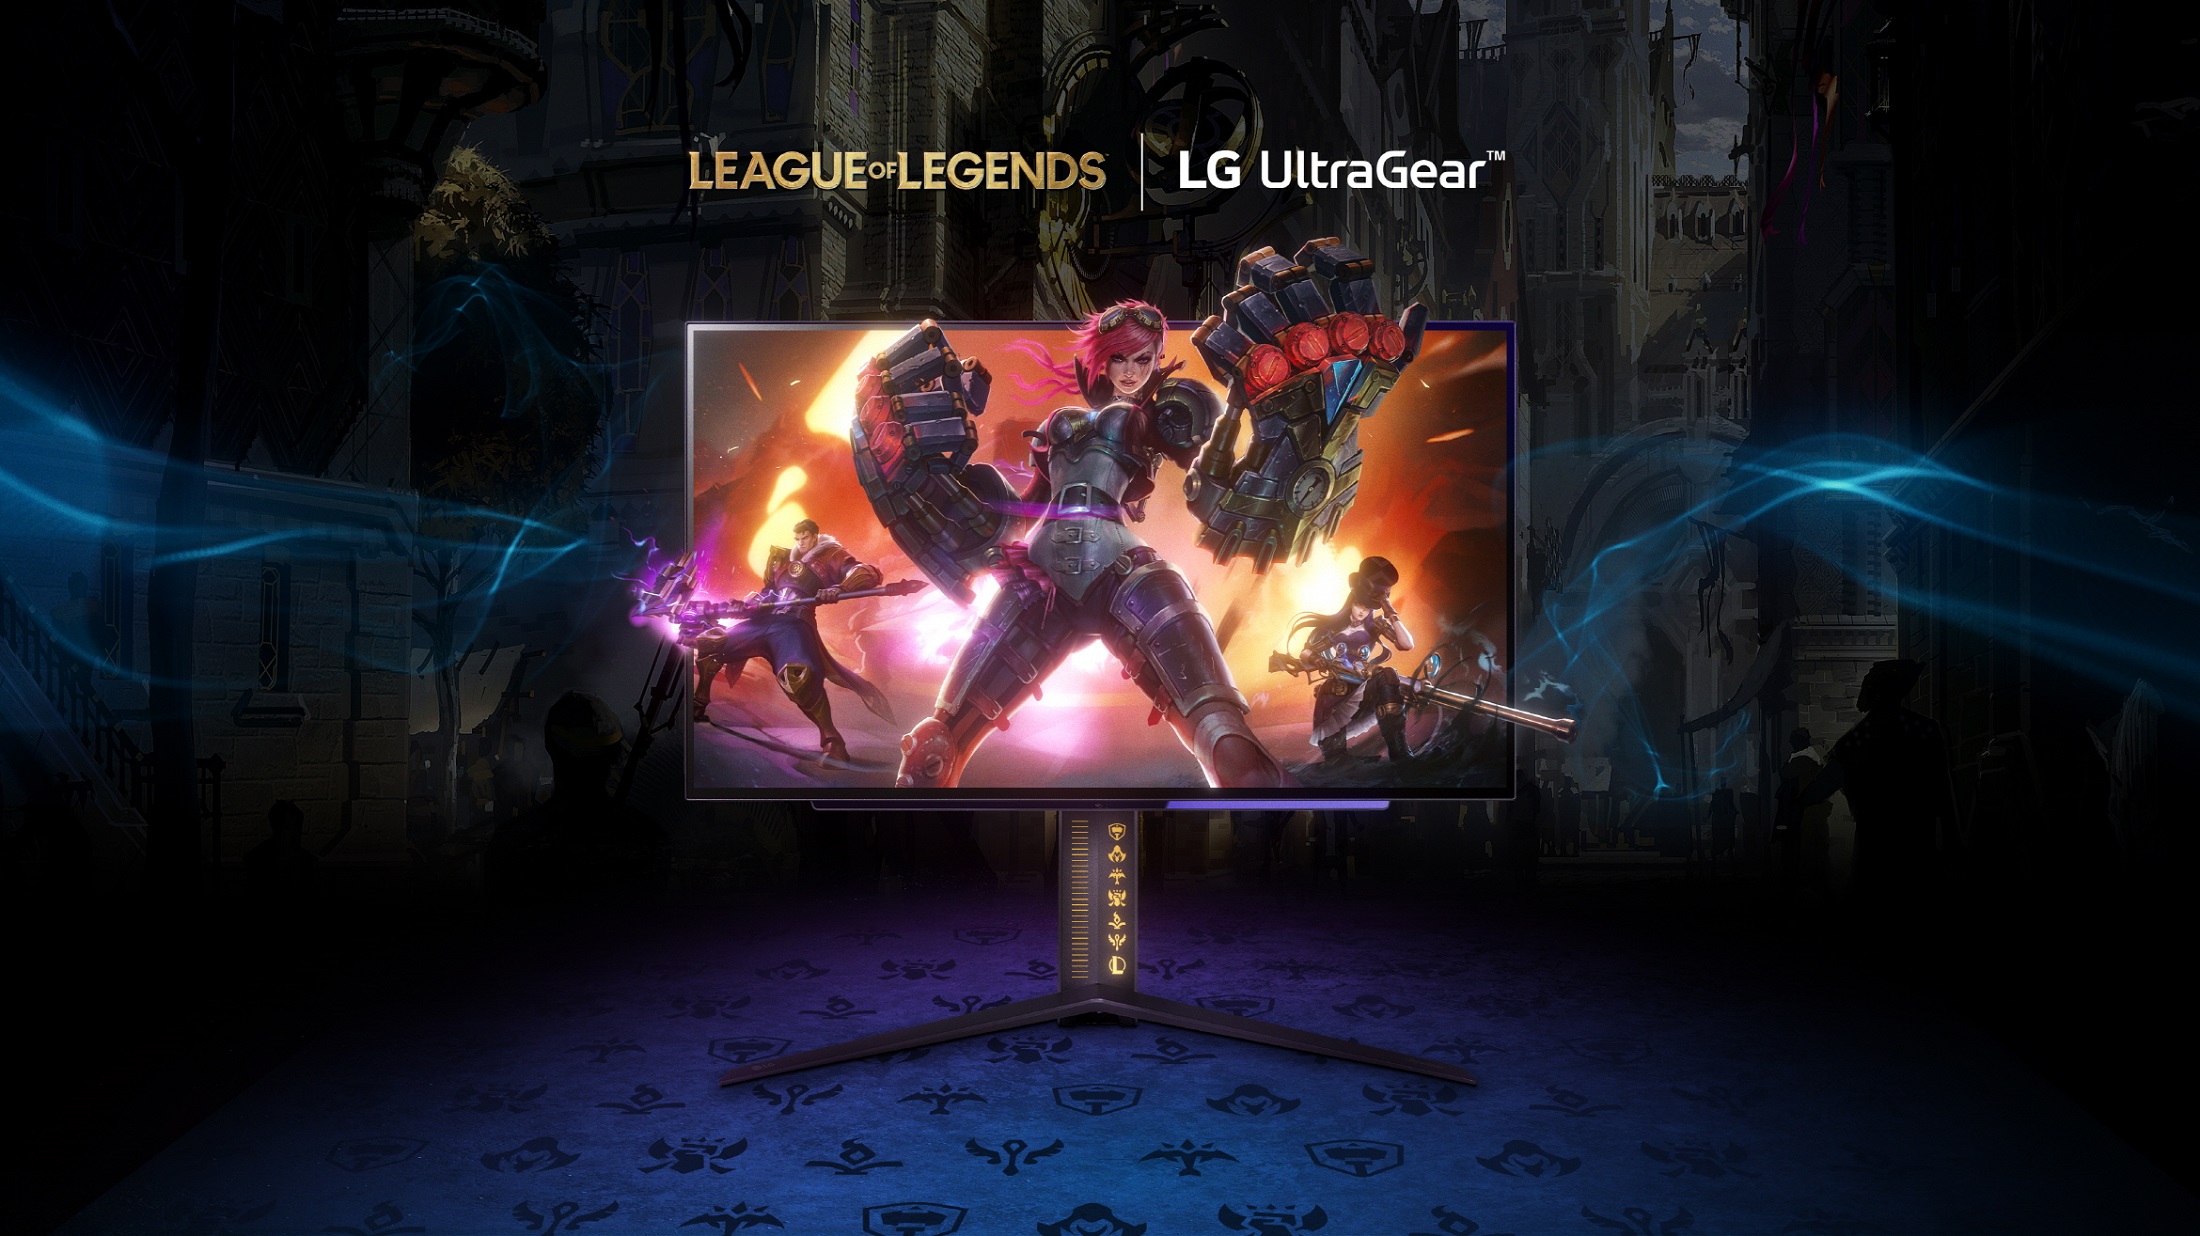 LG Reveals Exclusive ‘League of Legends’ UltraGear Gaming Monitor